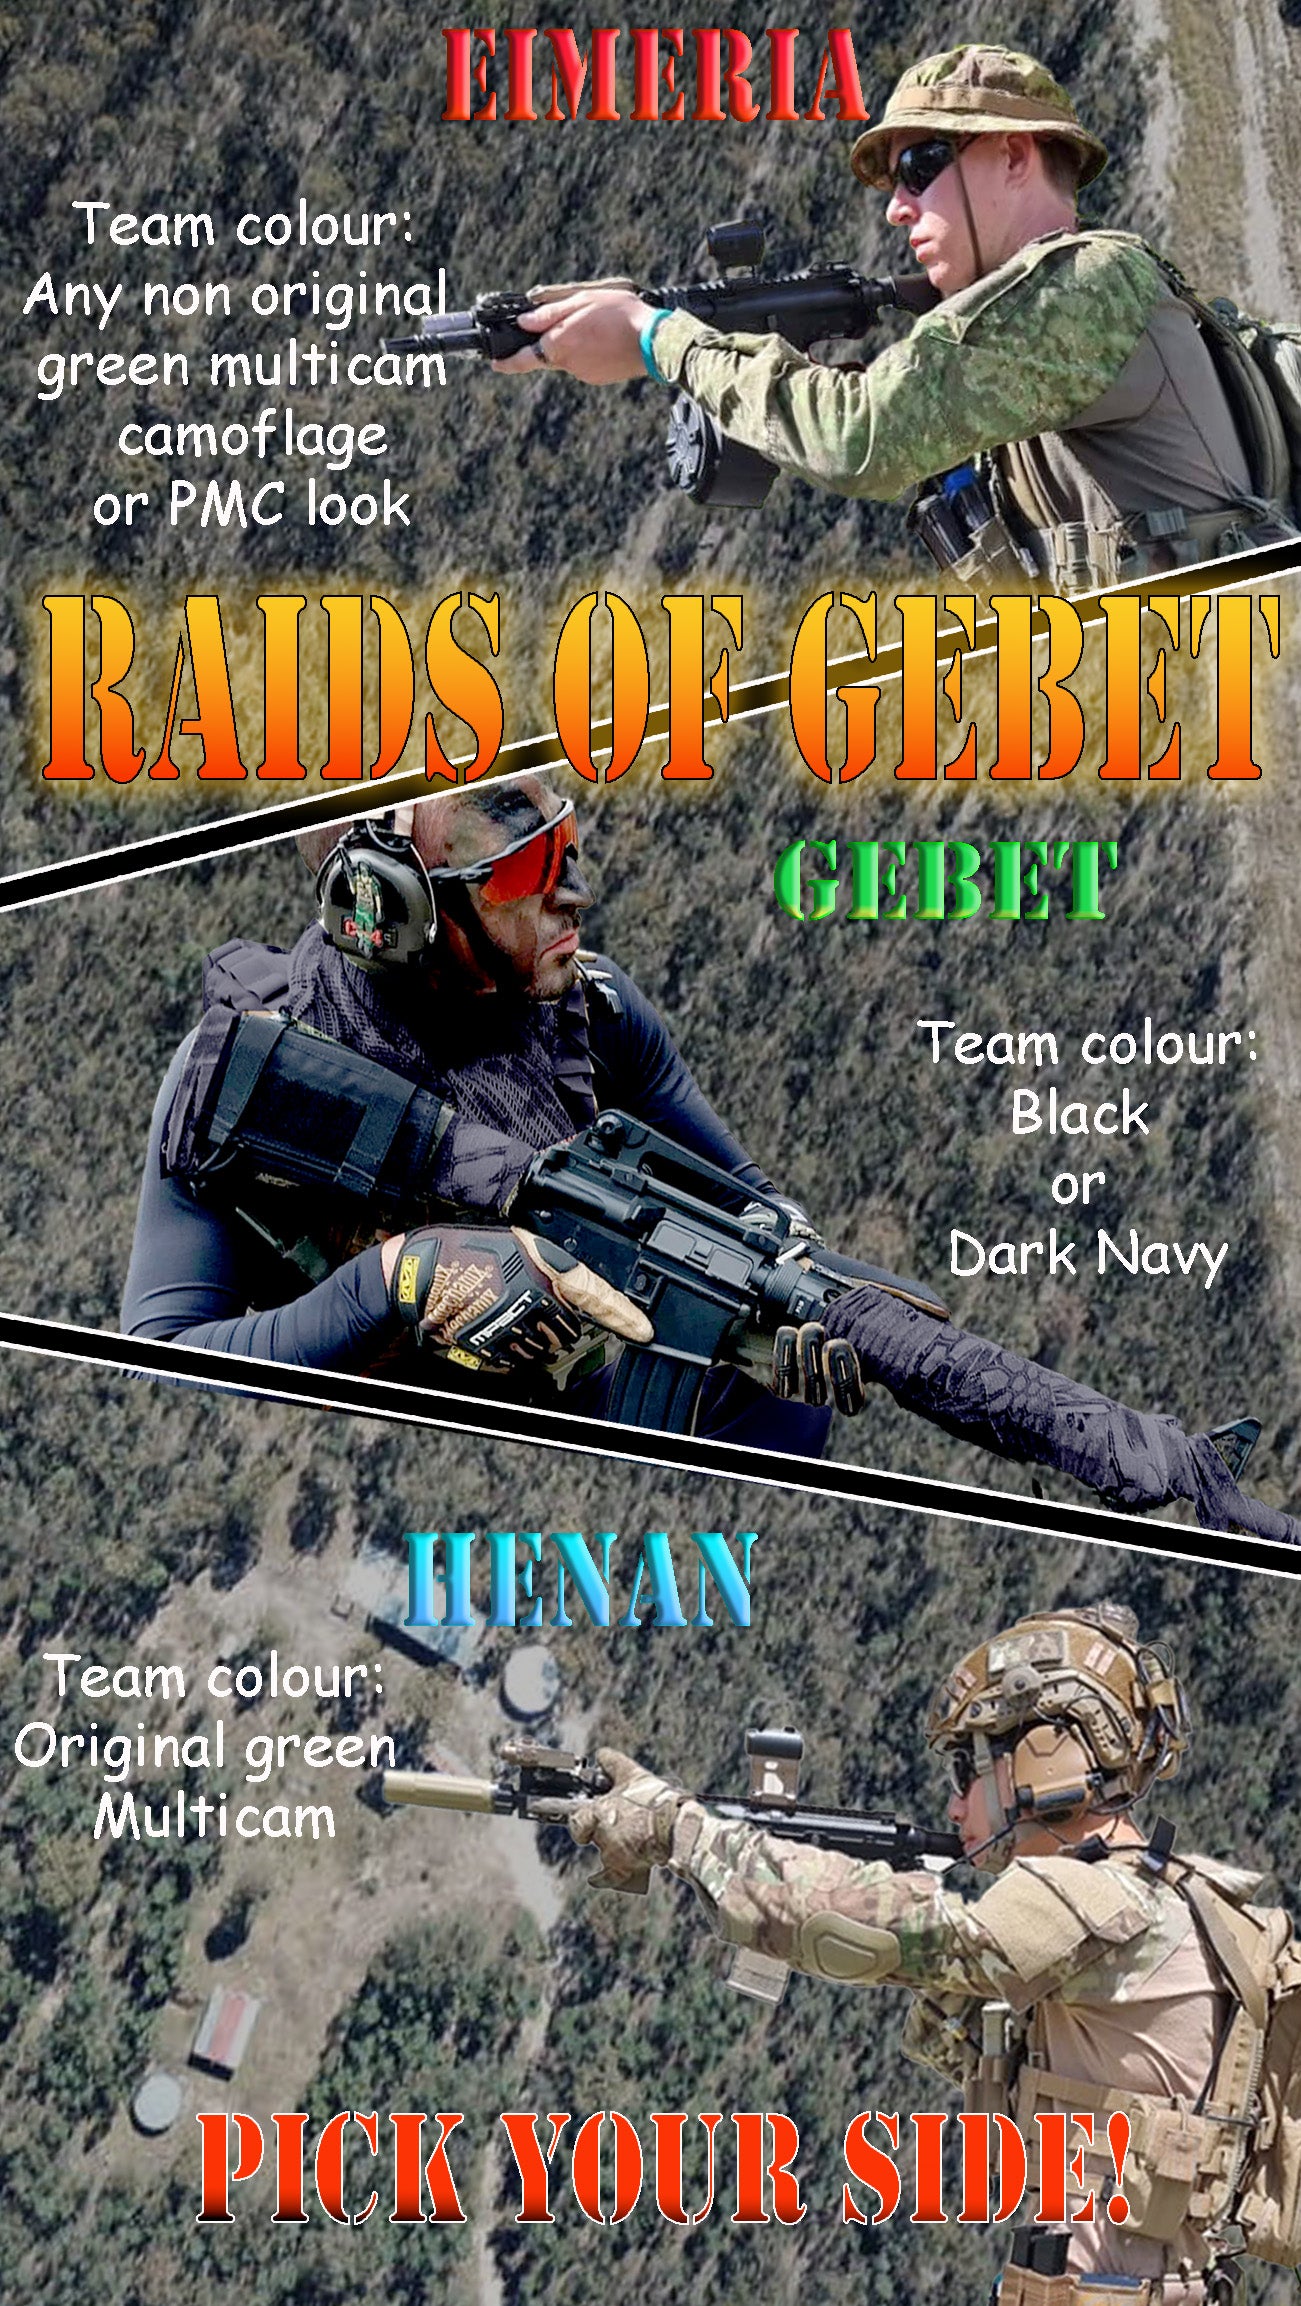 "Raids of Gebet" 29 Hour Event at Buccas Outpost May 4th & 5th 2024